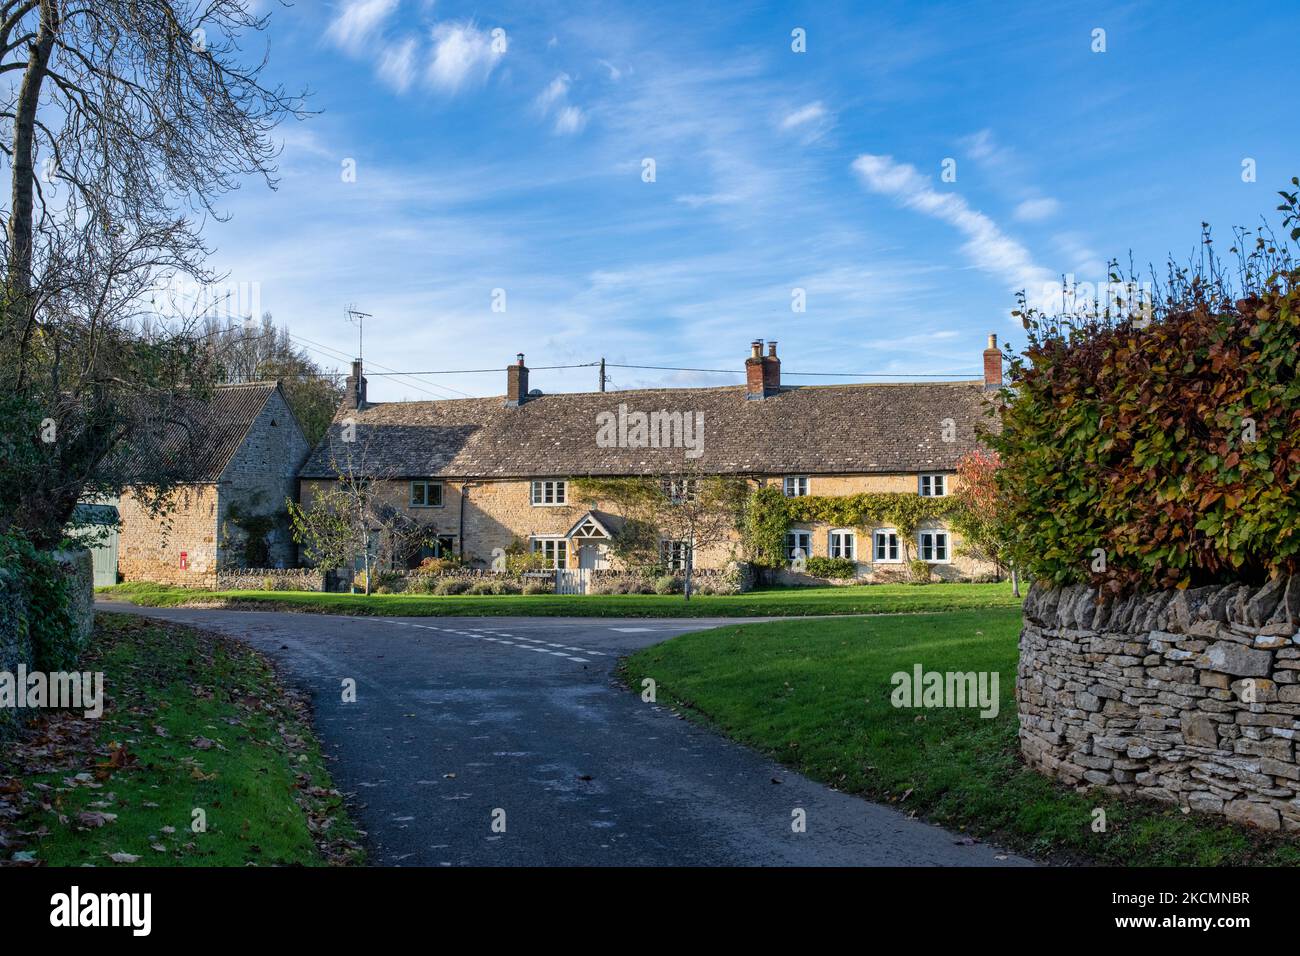 Little Compton cottages in autumn. Little Compton, Warwickshire, England Stock Photo